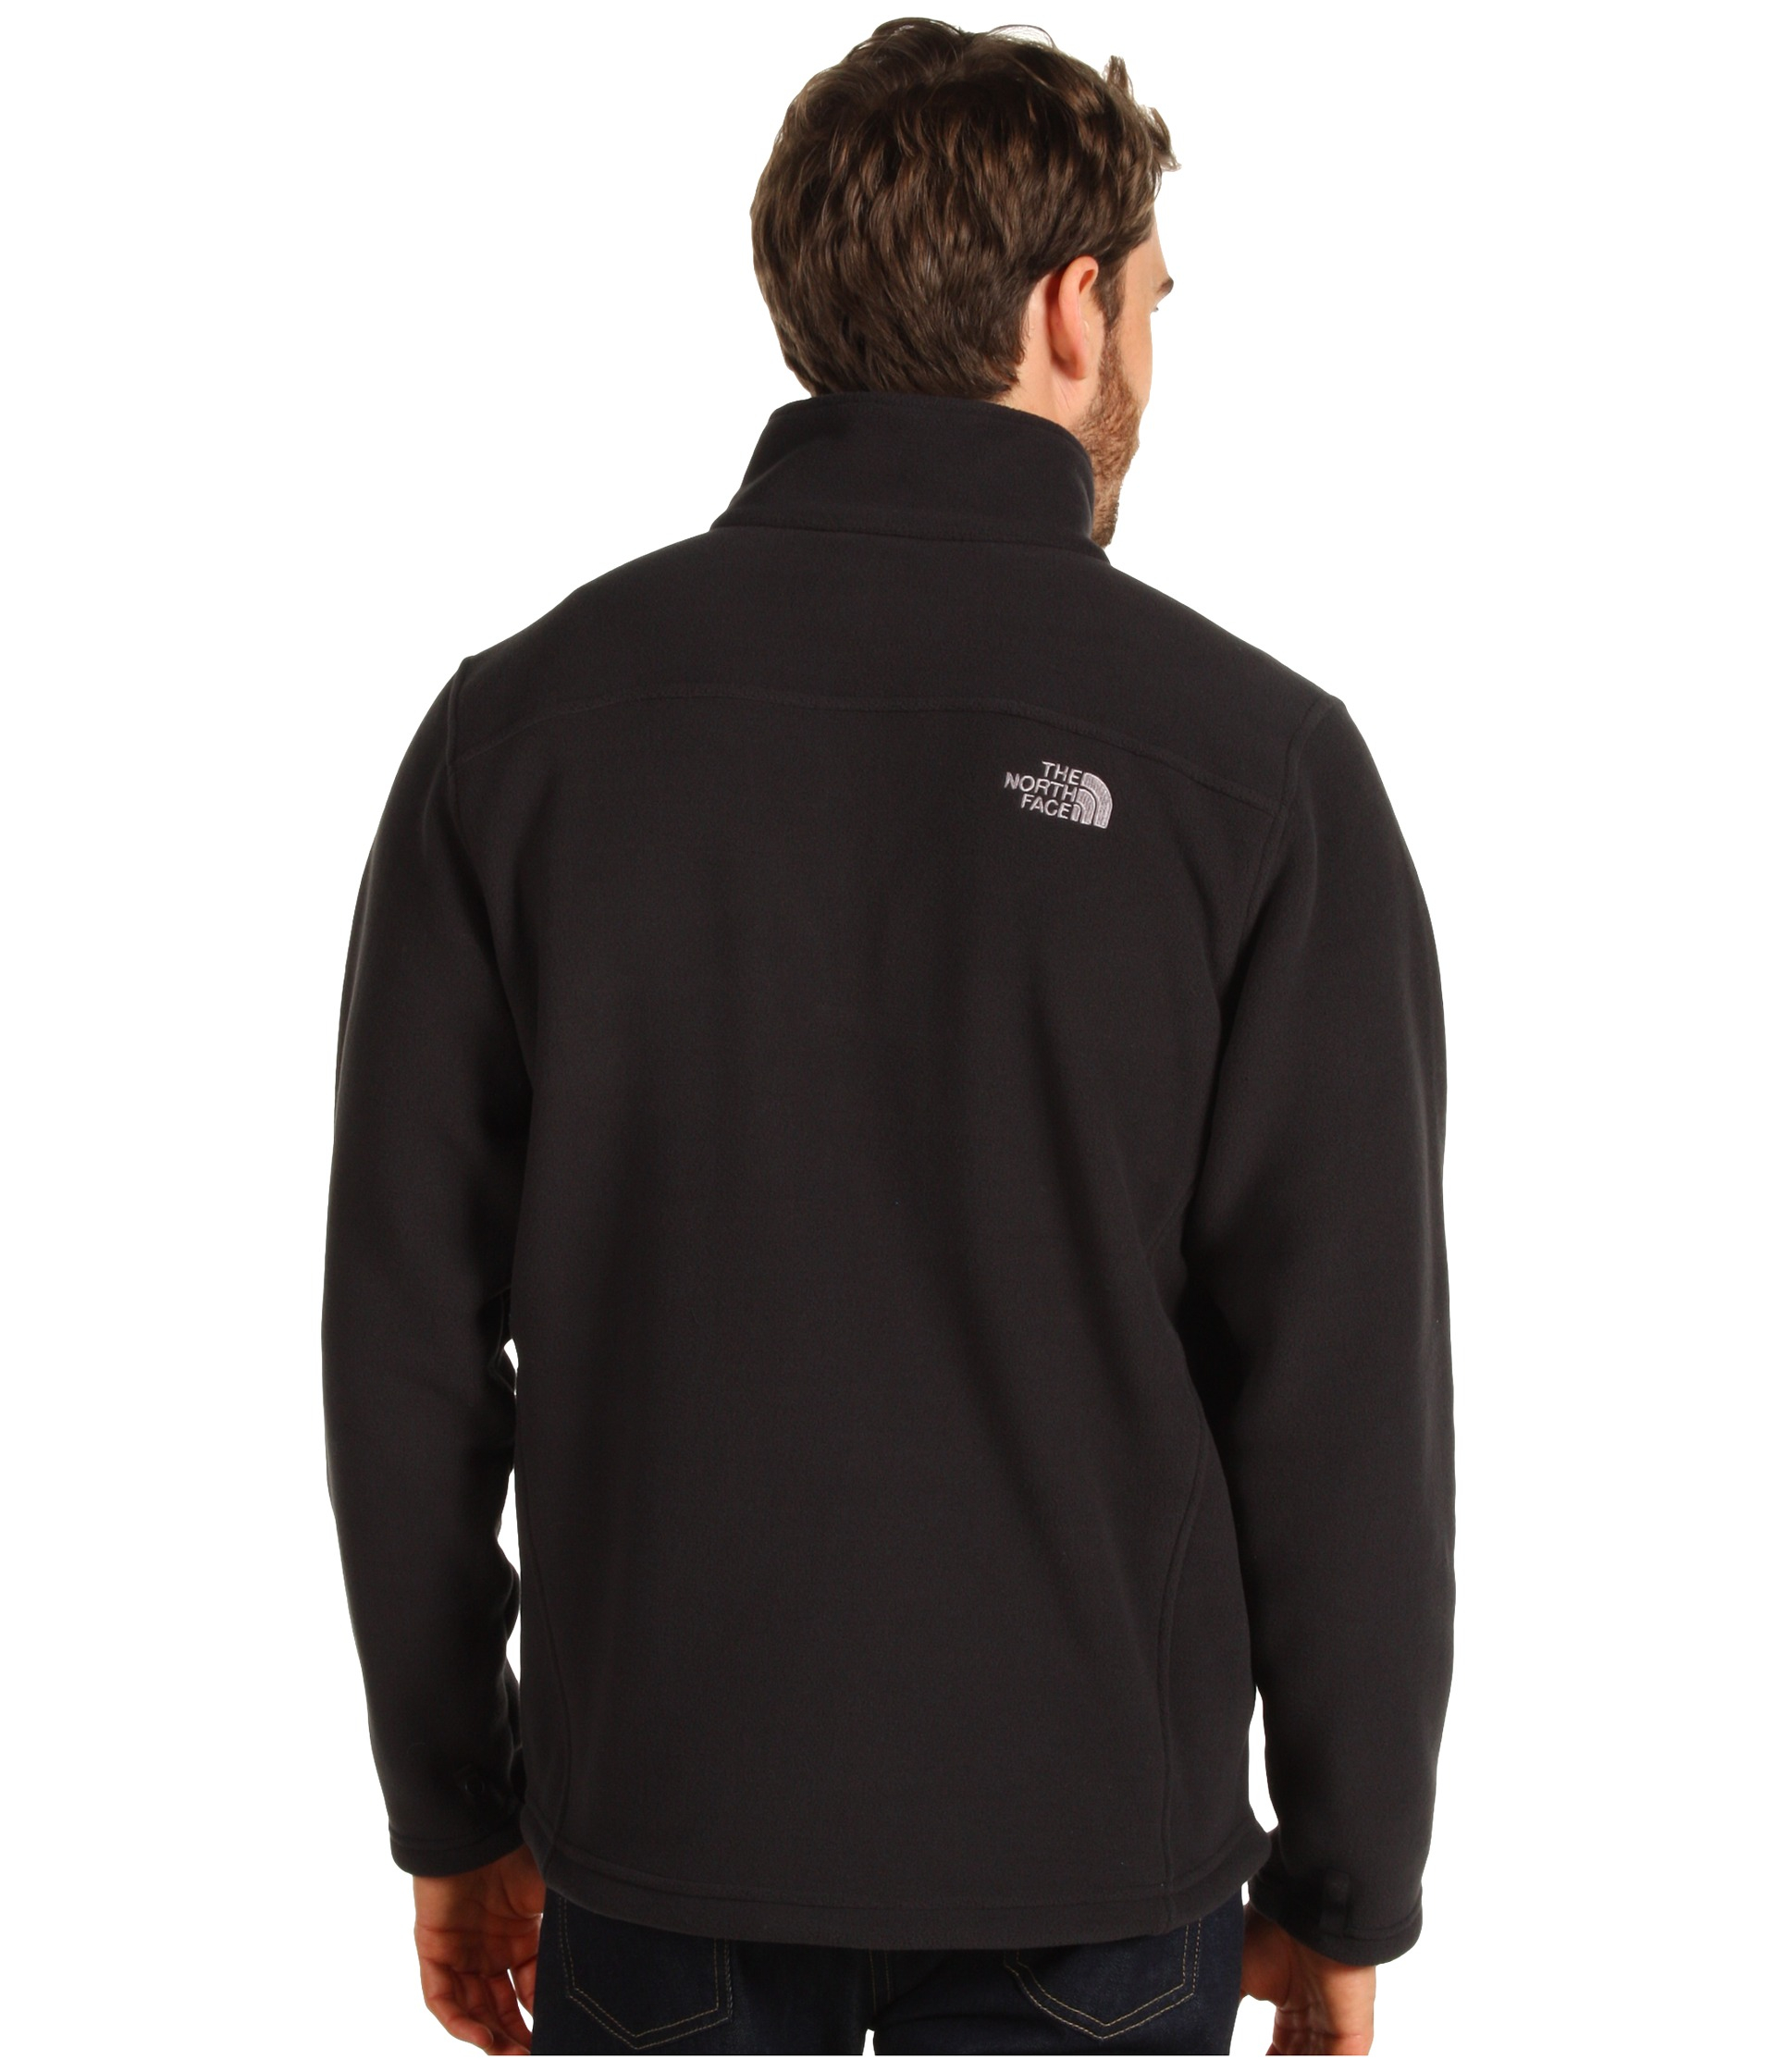 Lyst - The North Face Rdt 300 Jacket in Black for Men